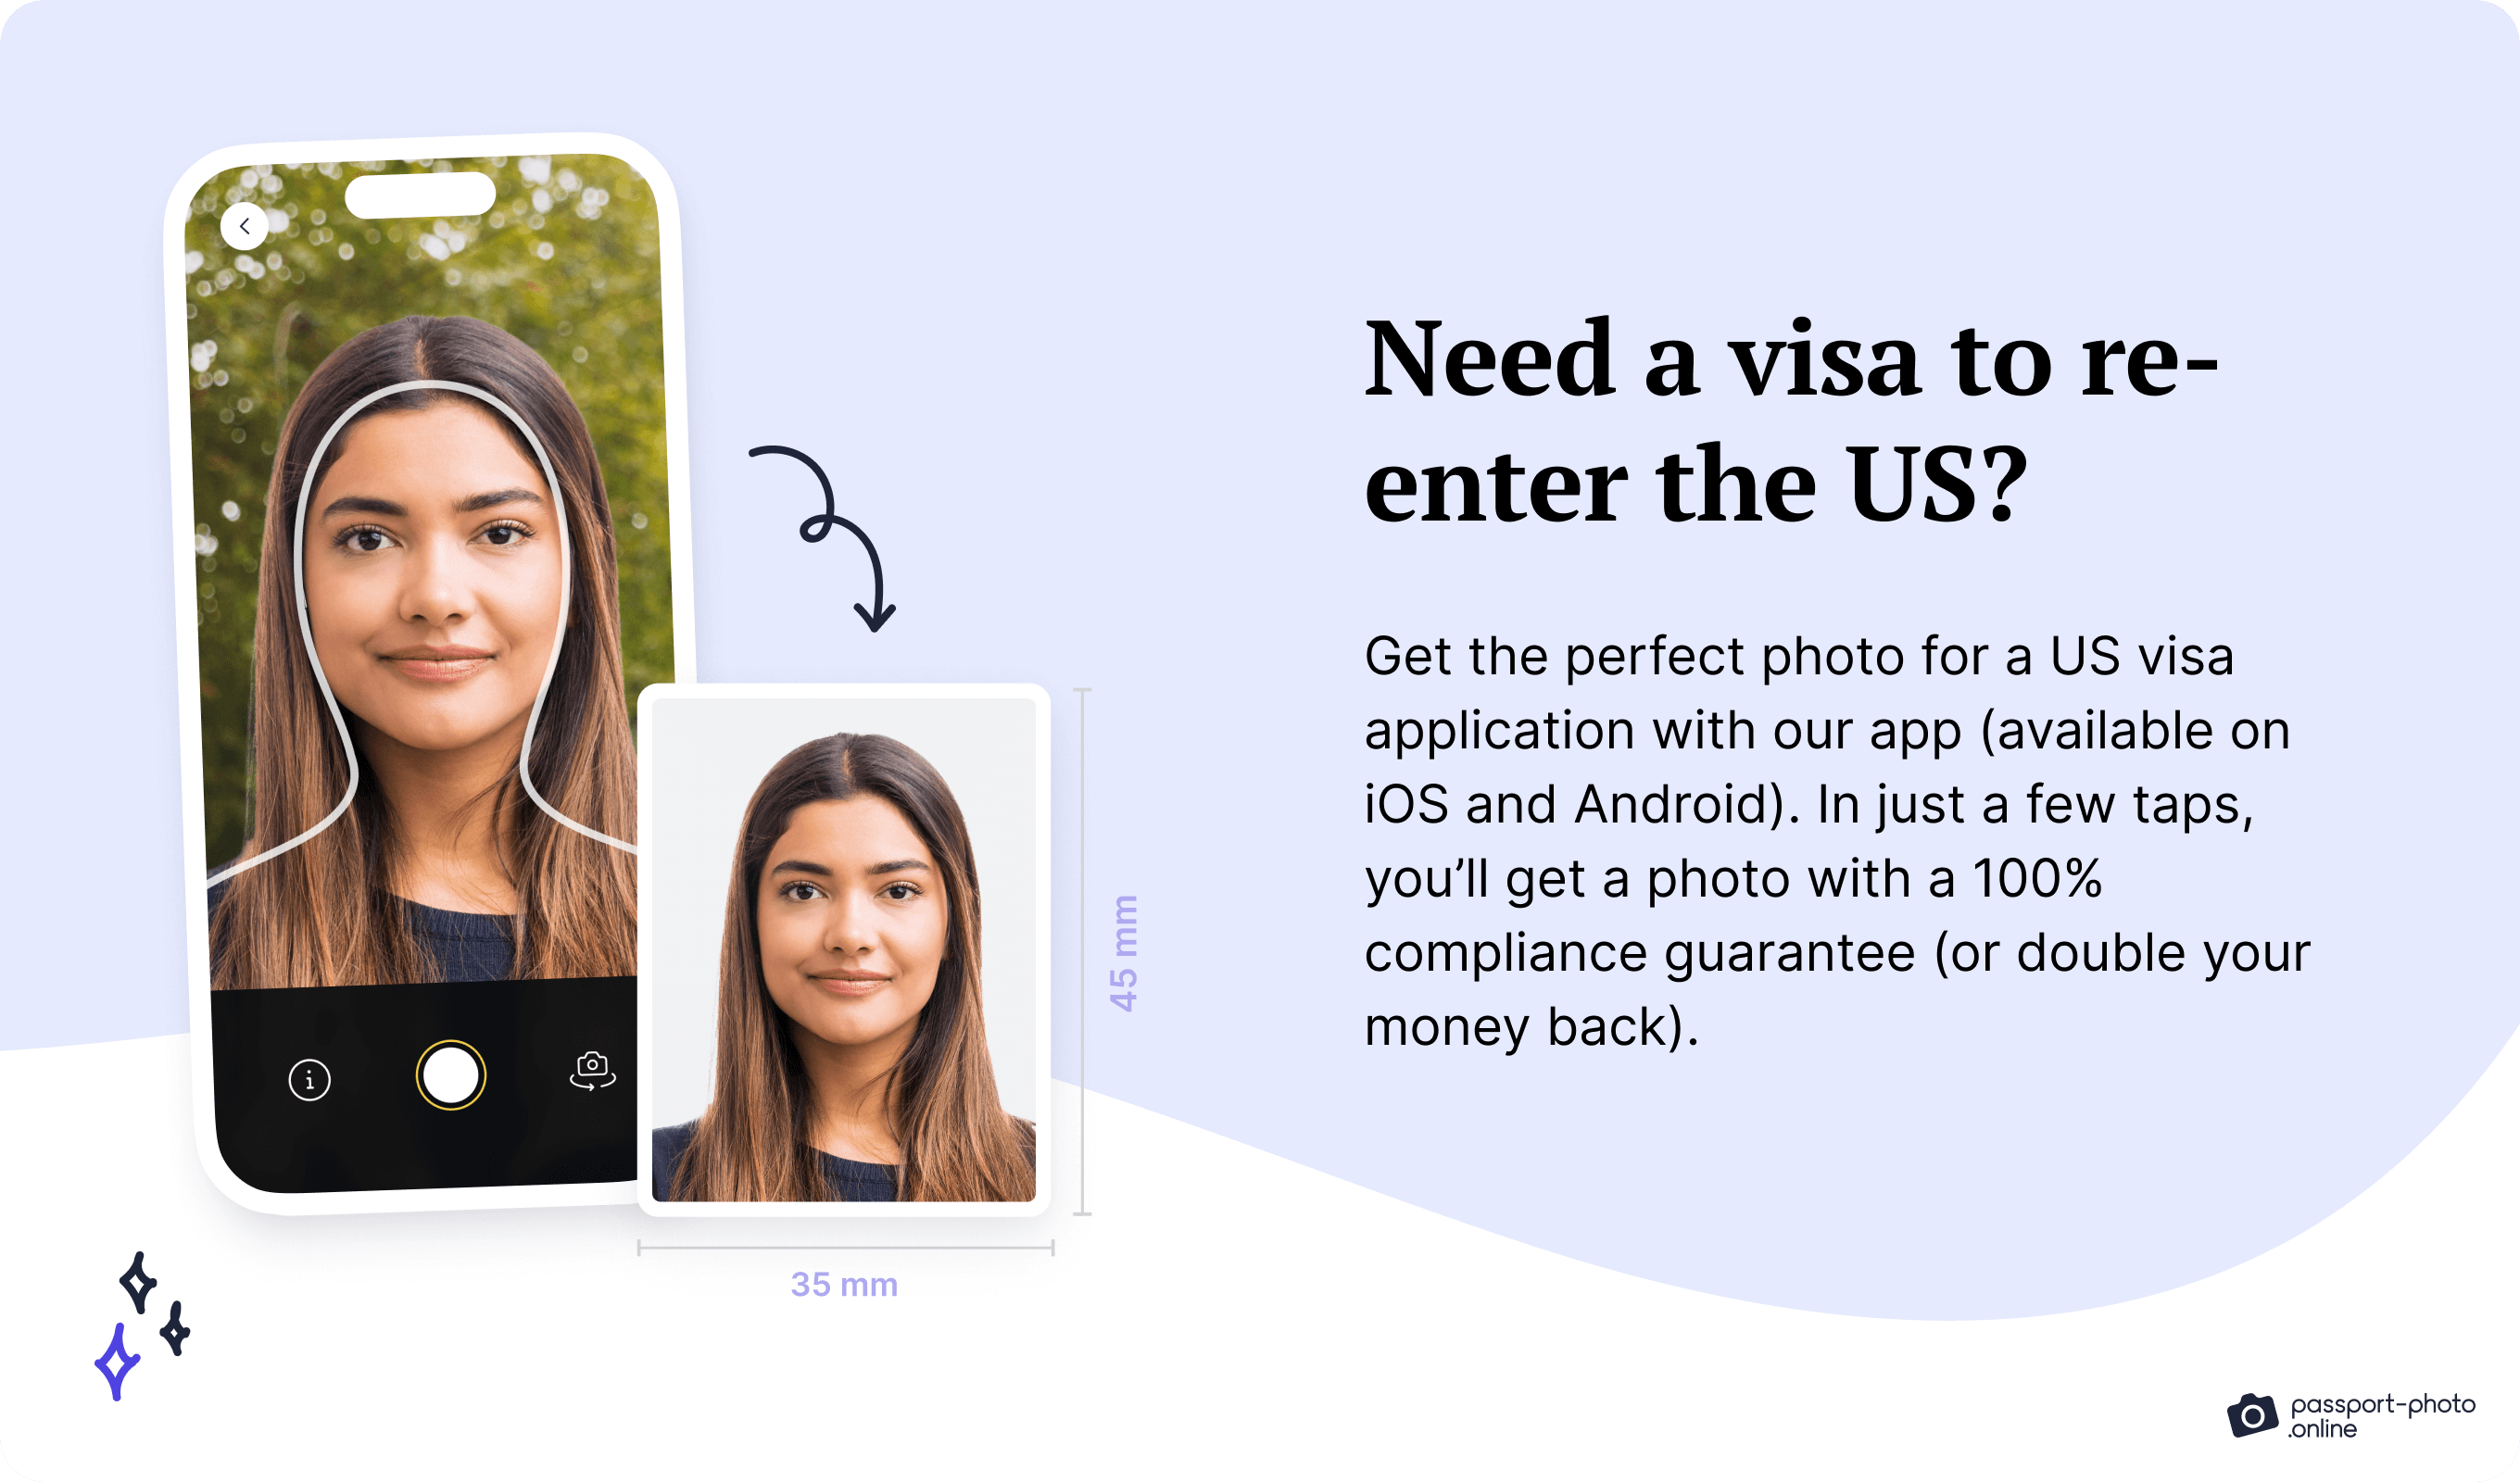 A graphic explaining how to get a 100% compliant US visa picture to enter the country from Mexico.